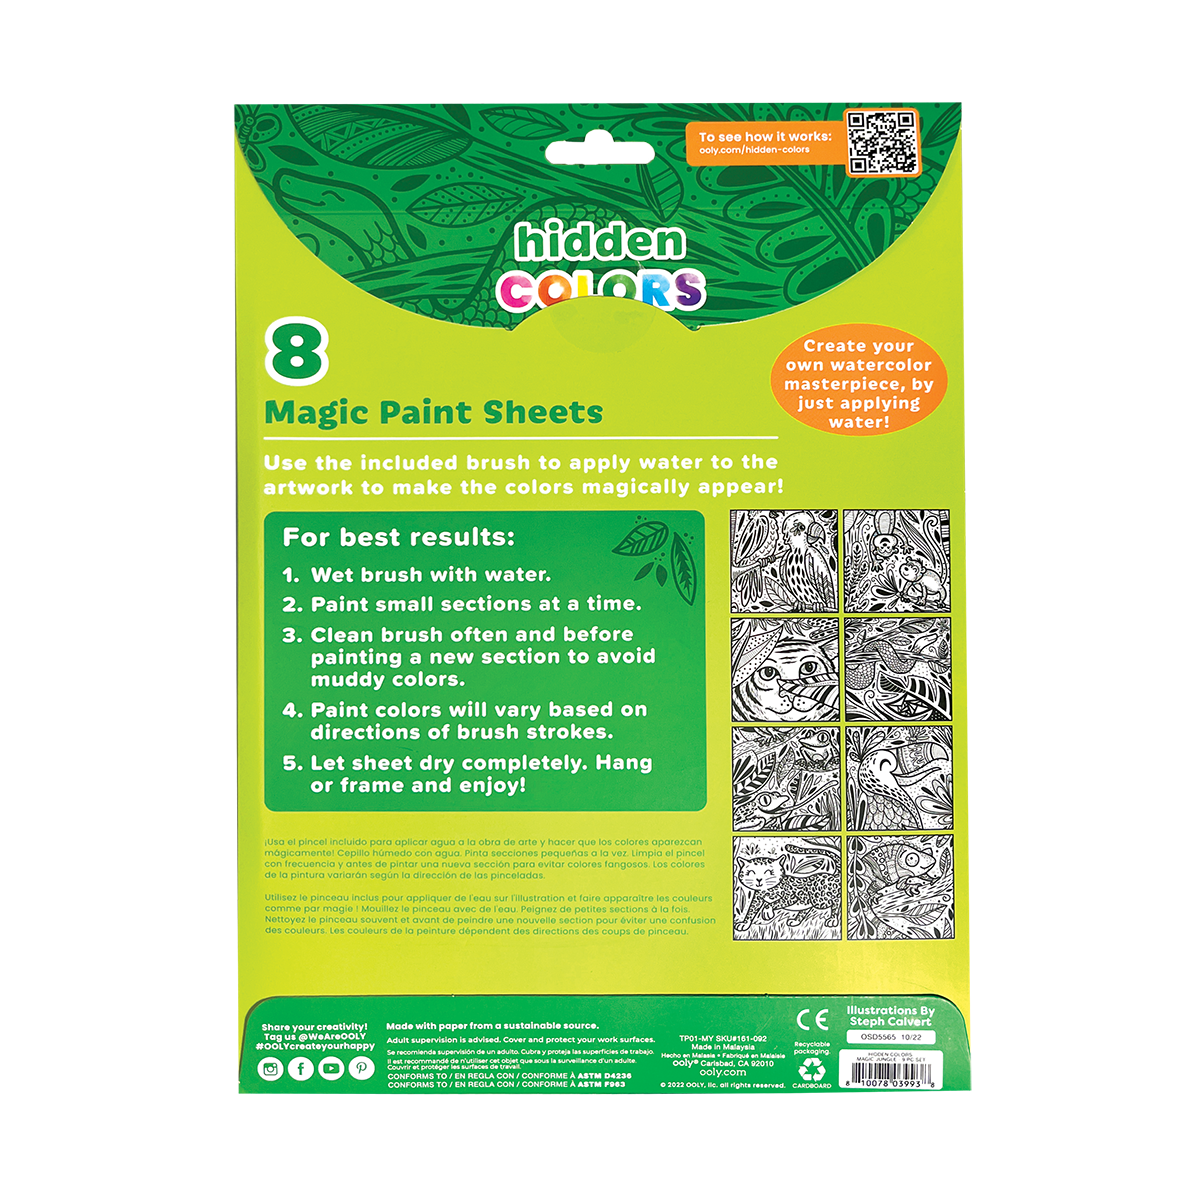 OOLY Hidden Colors Magic Paint Sheets - Magic Jungle backside view of packaging